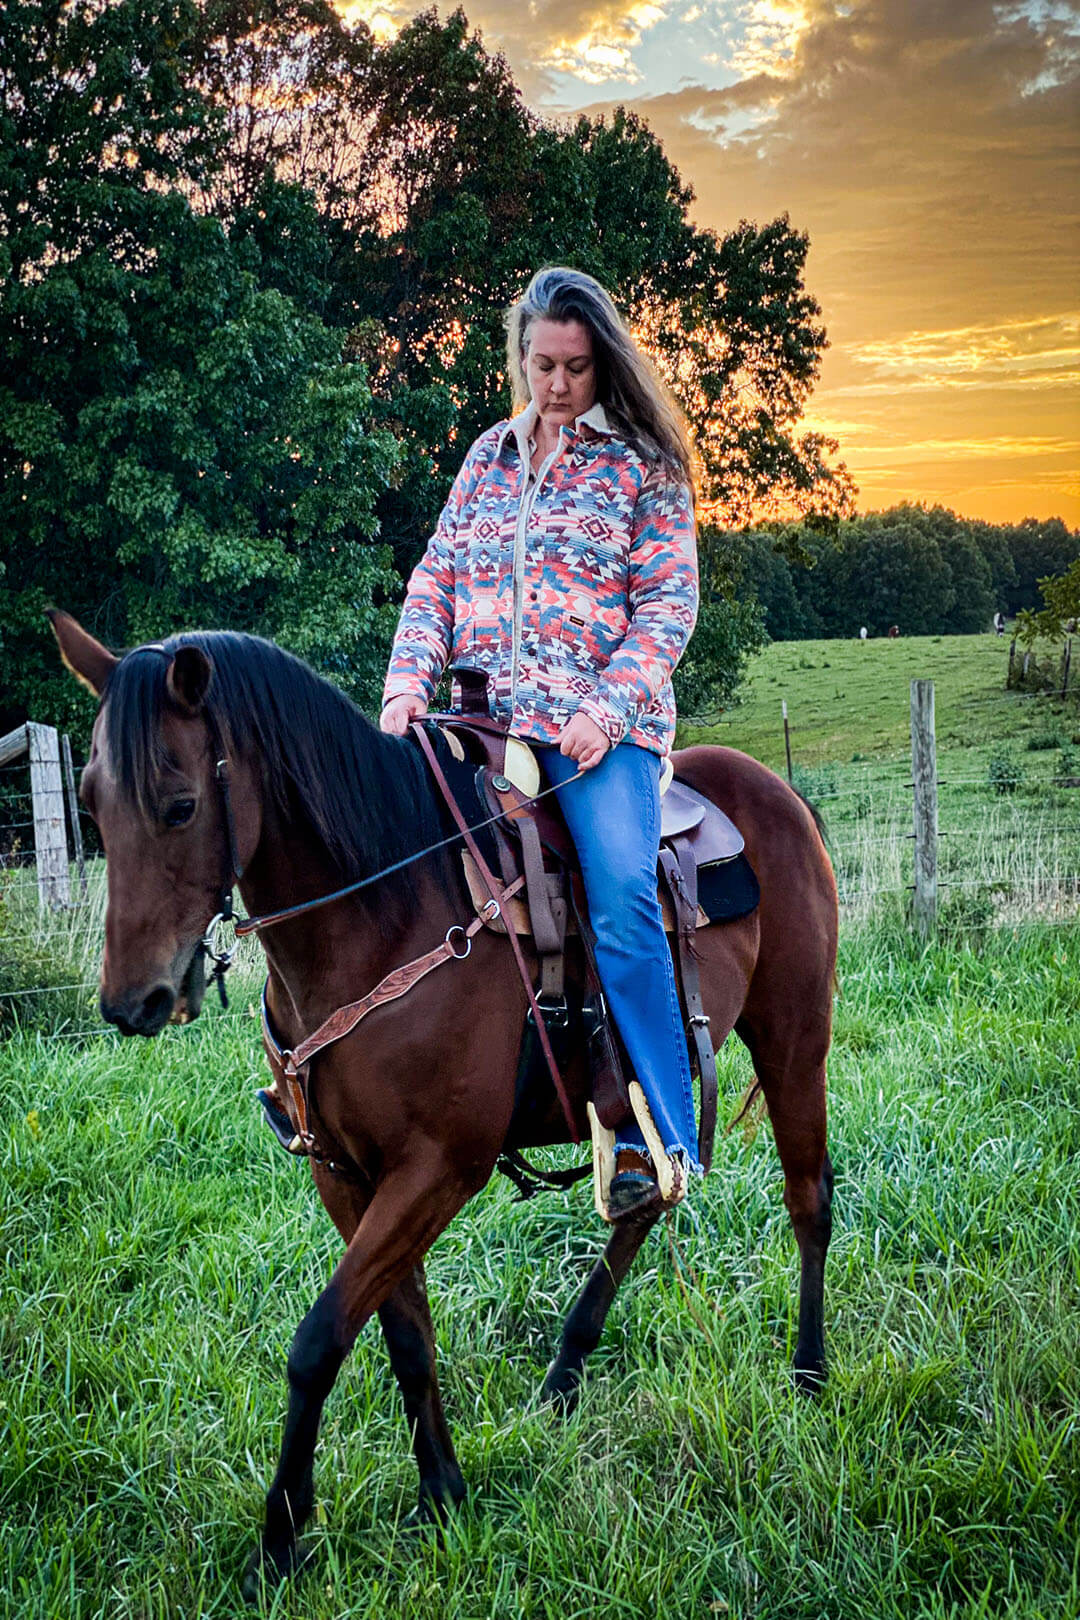 Woman in insulated sherpa aztec jacket, riding horse with sunset behind her.  Jacket southwest coloring, aztec symbols in blue pink red tones